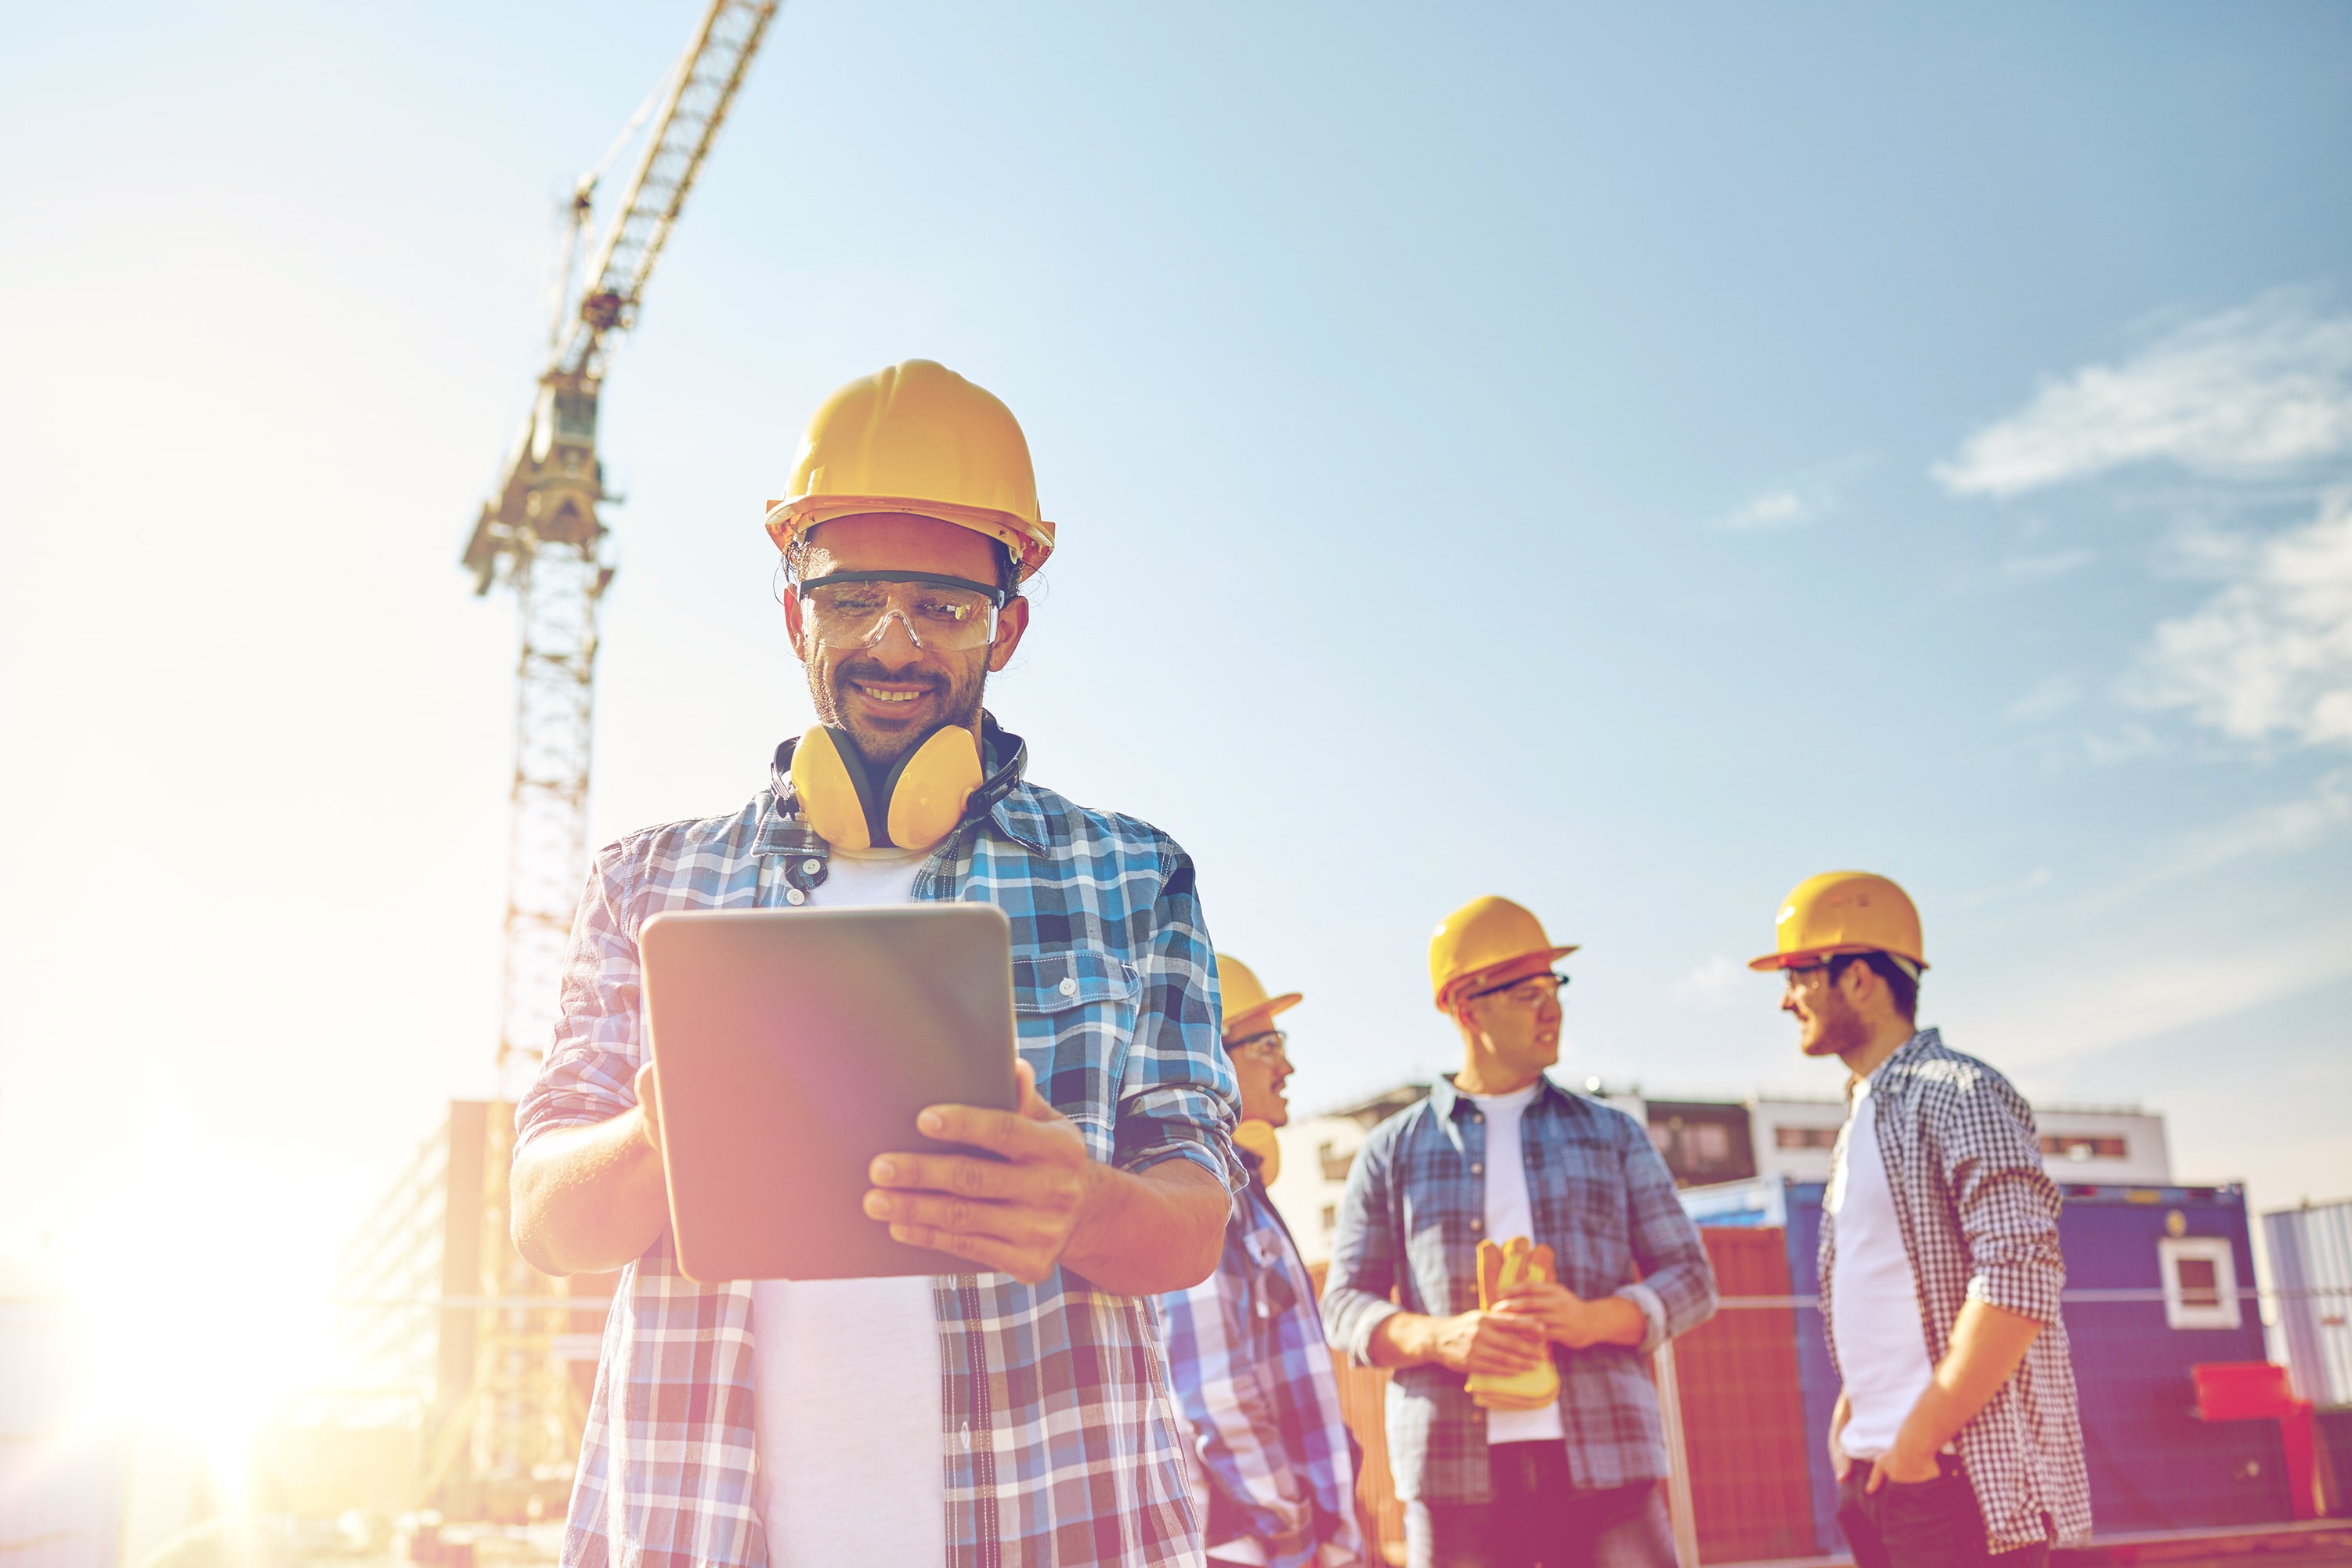 Prequalification: Benefits and Challenges for General Contractors